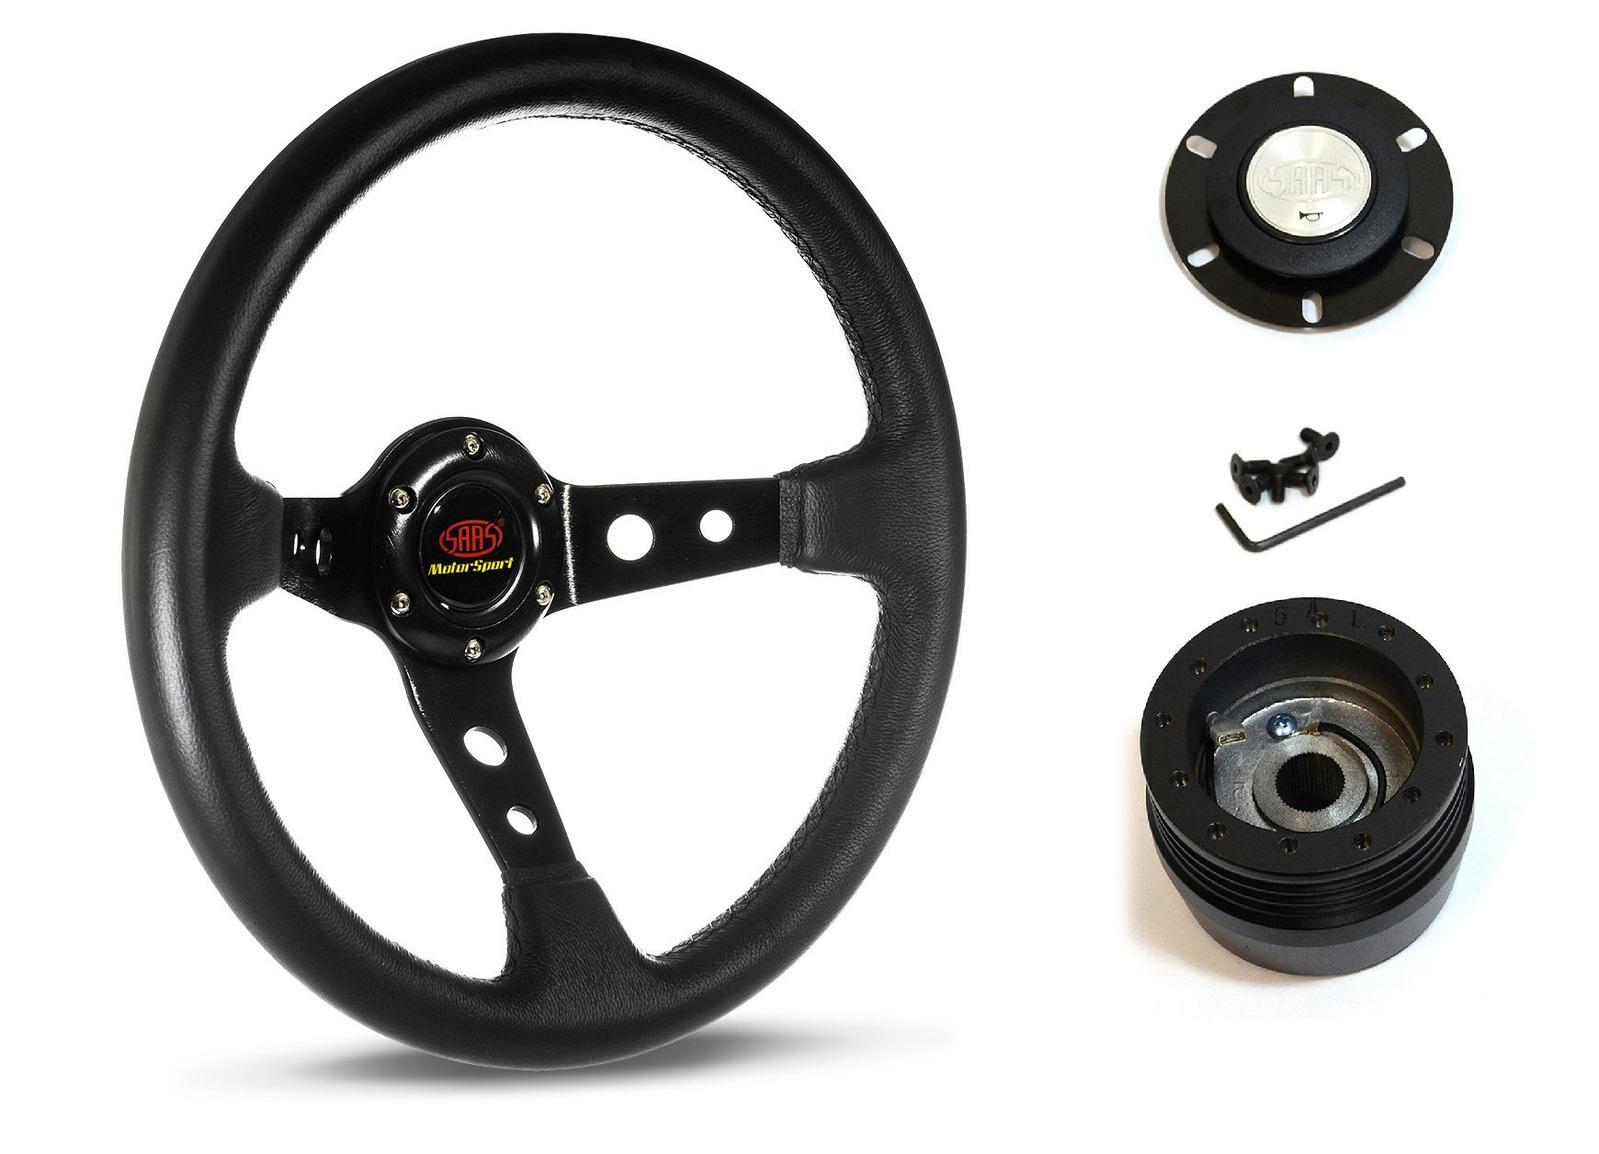 SAAS Steering Wheel Leather 14" ADR GT Deep Dish Black With Holes SWGT3 and SAAS boss kit for Holden Nova LG 1993-1997